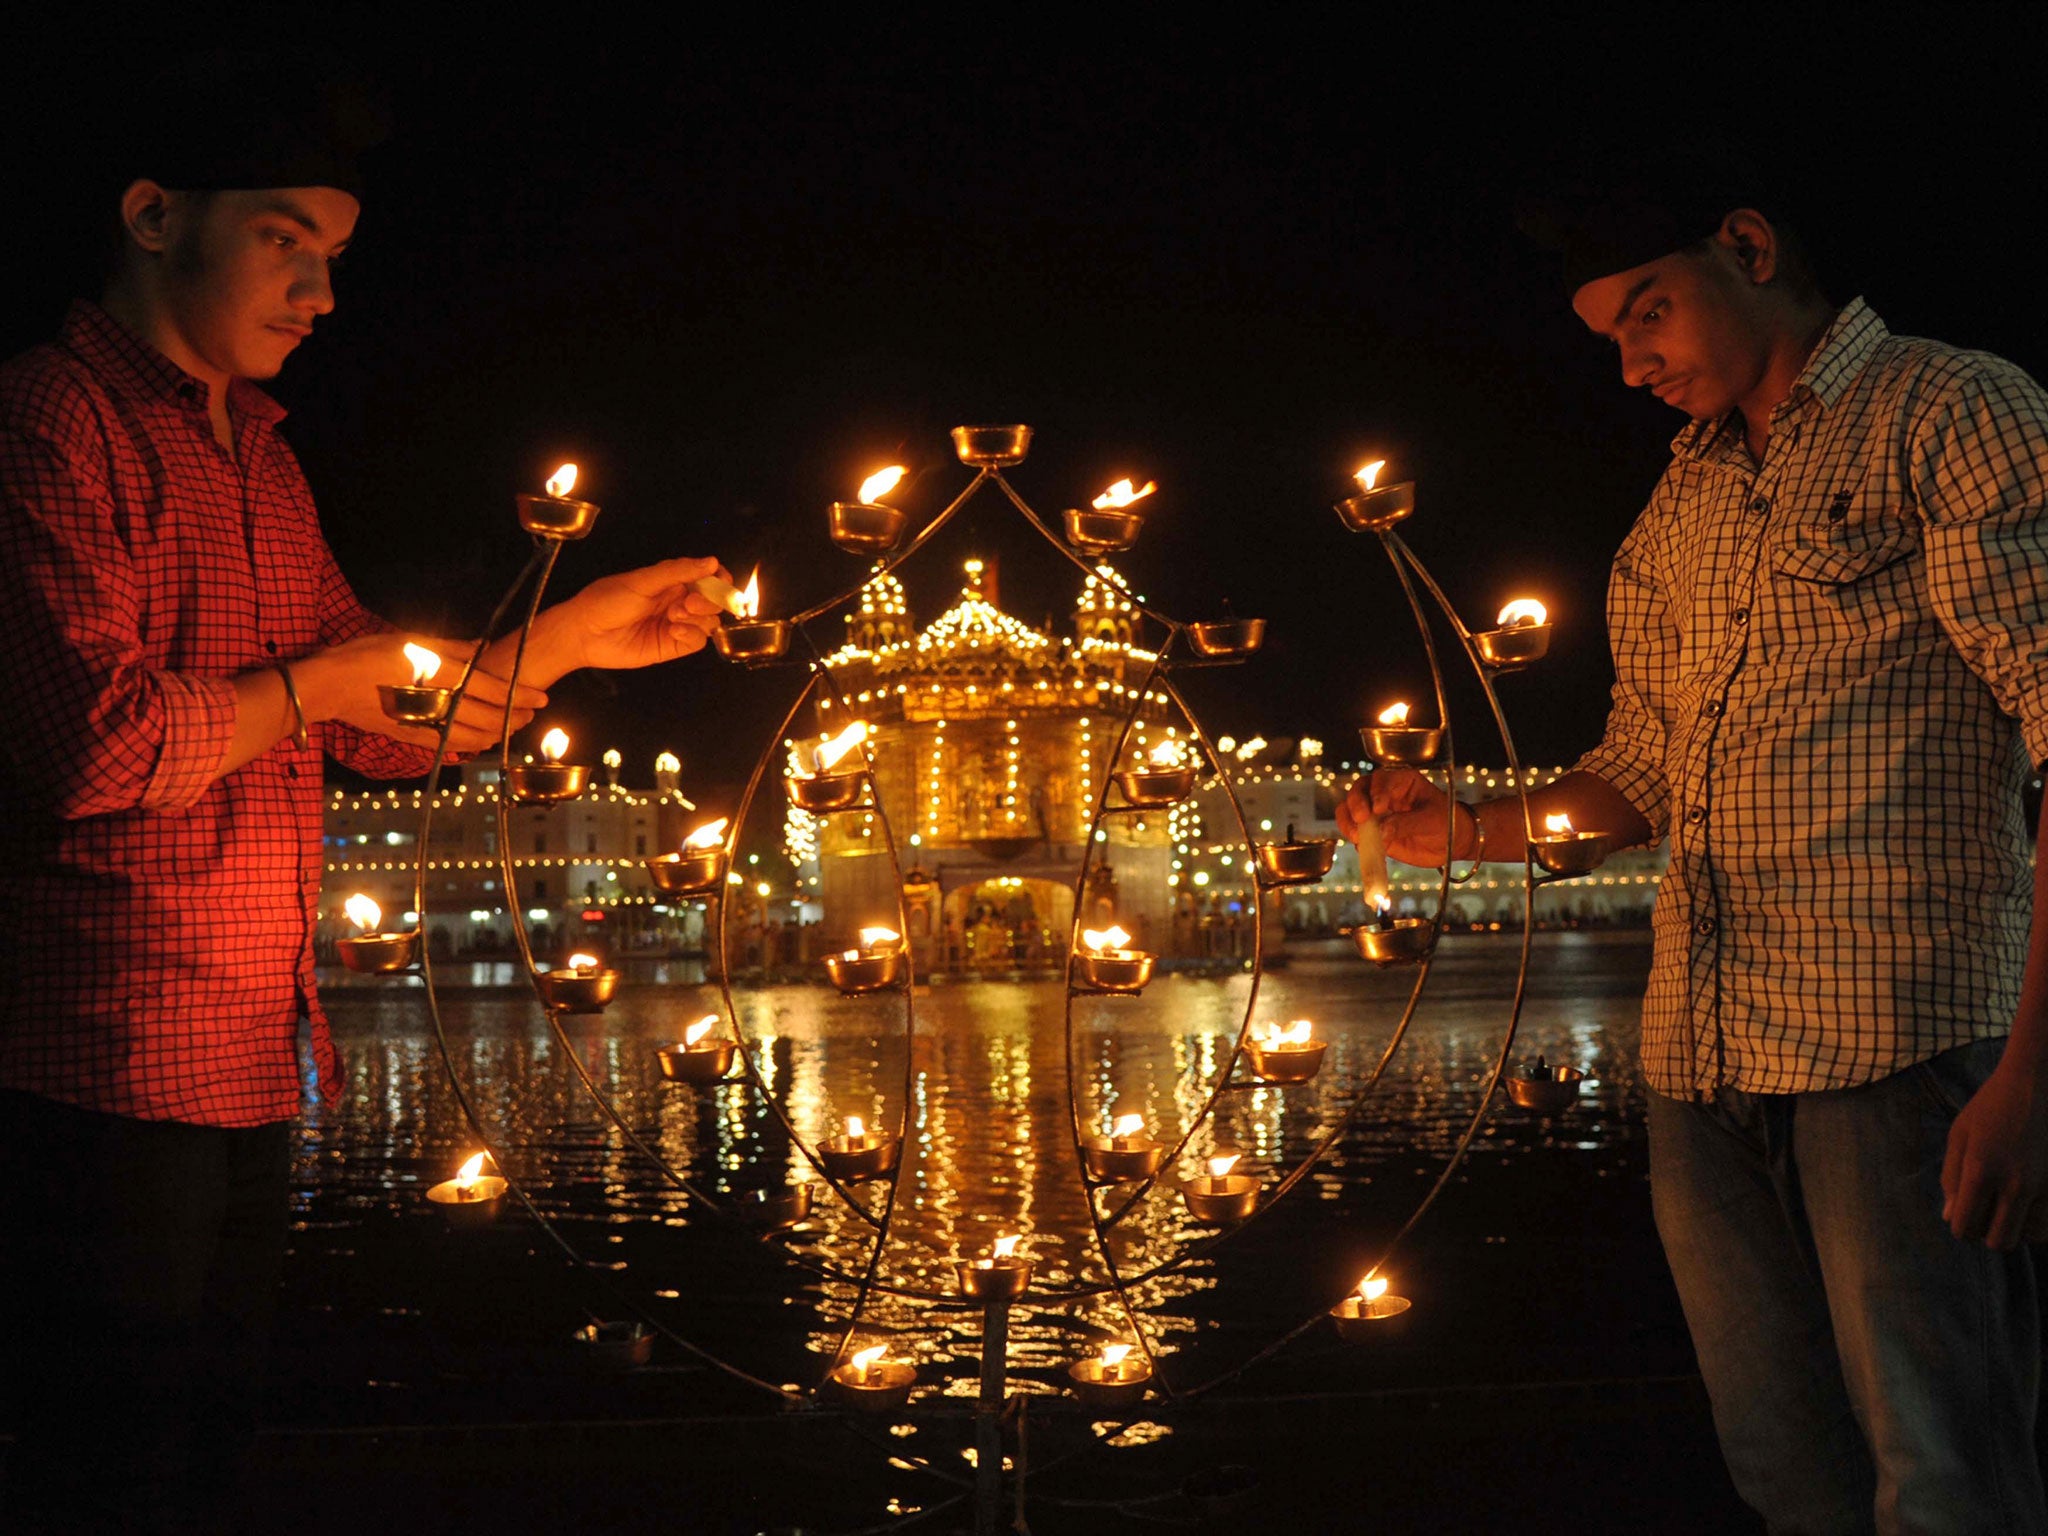 Indian Sikh devotees pose as they light lamps at the Golden Temple in Amritsar